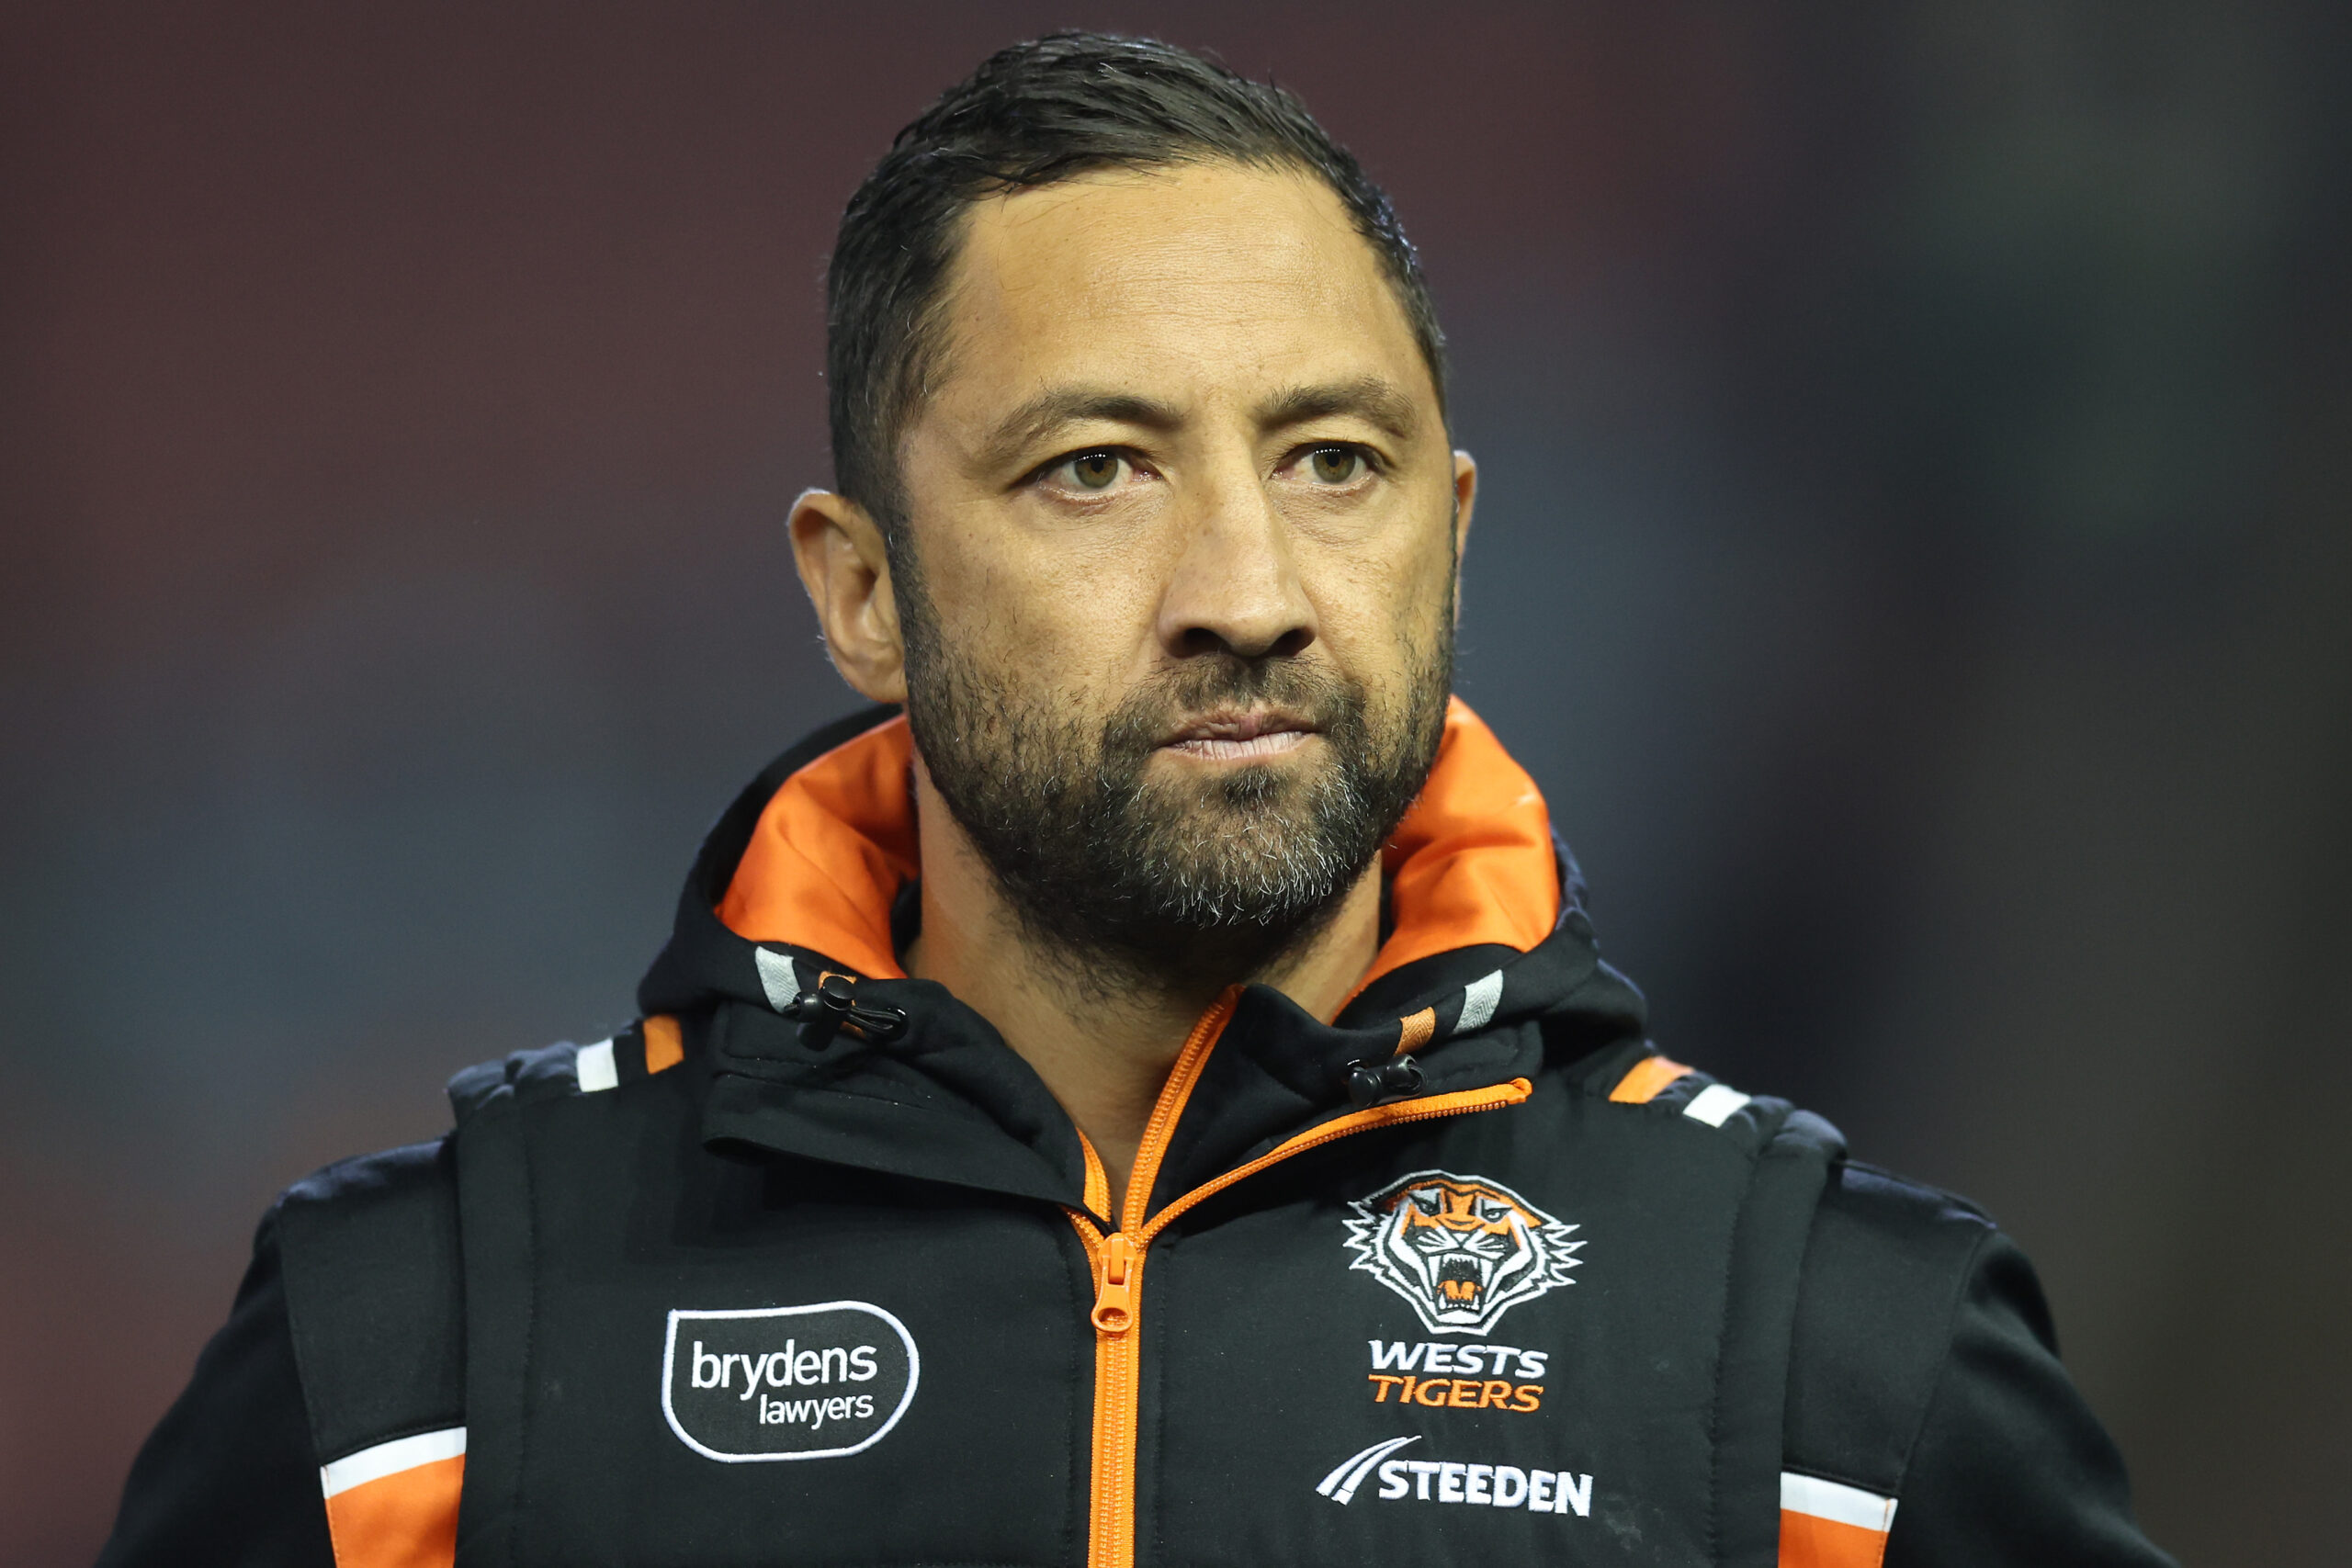 NRL Rd 20 - Knights v Wests Tigers